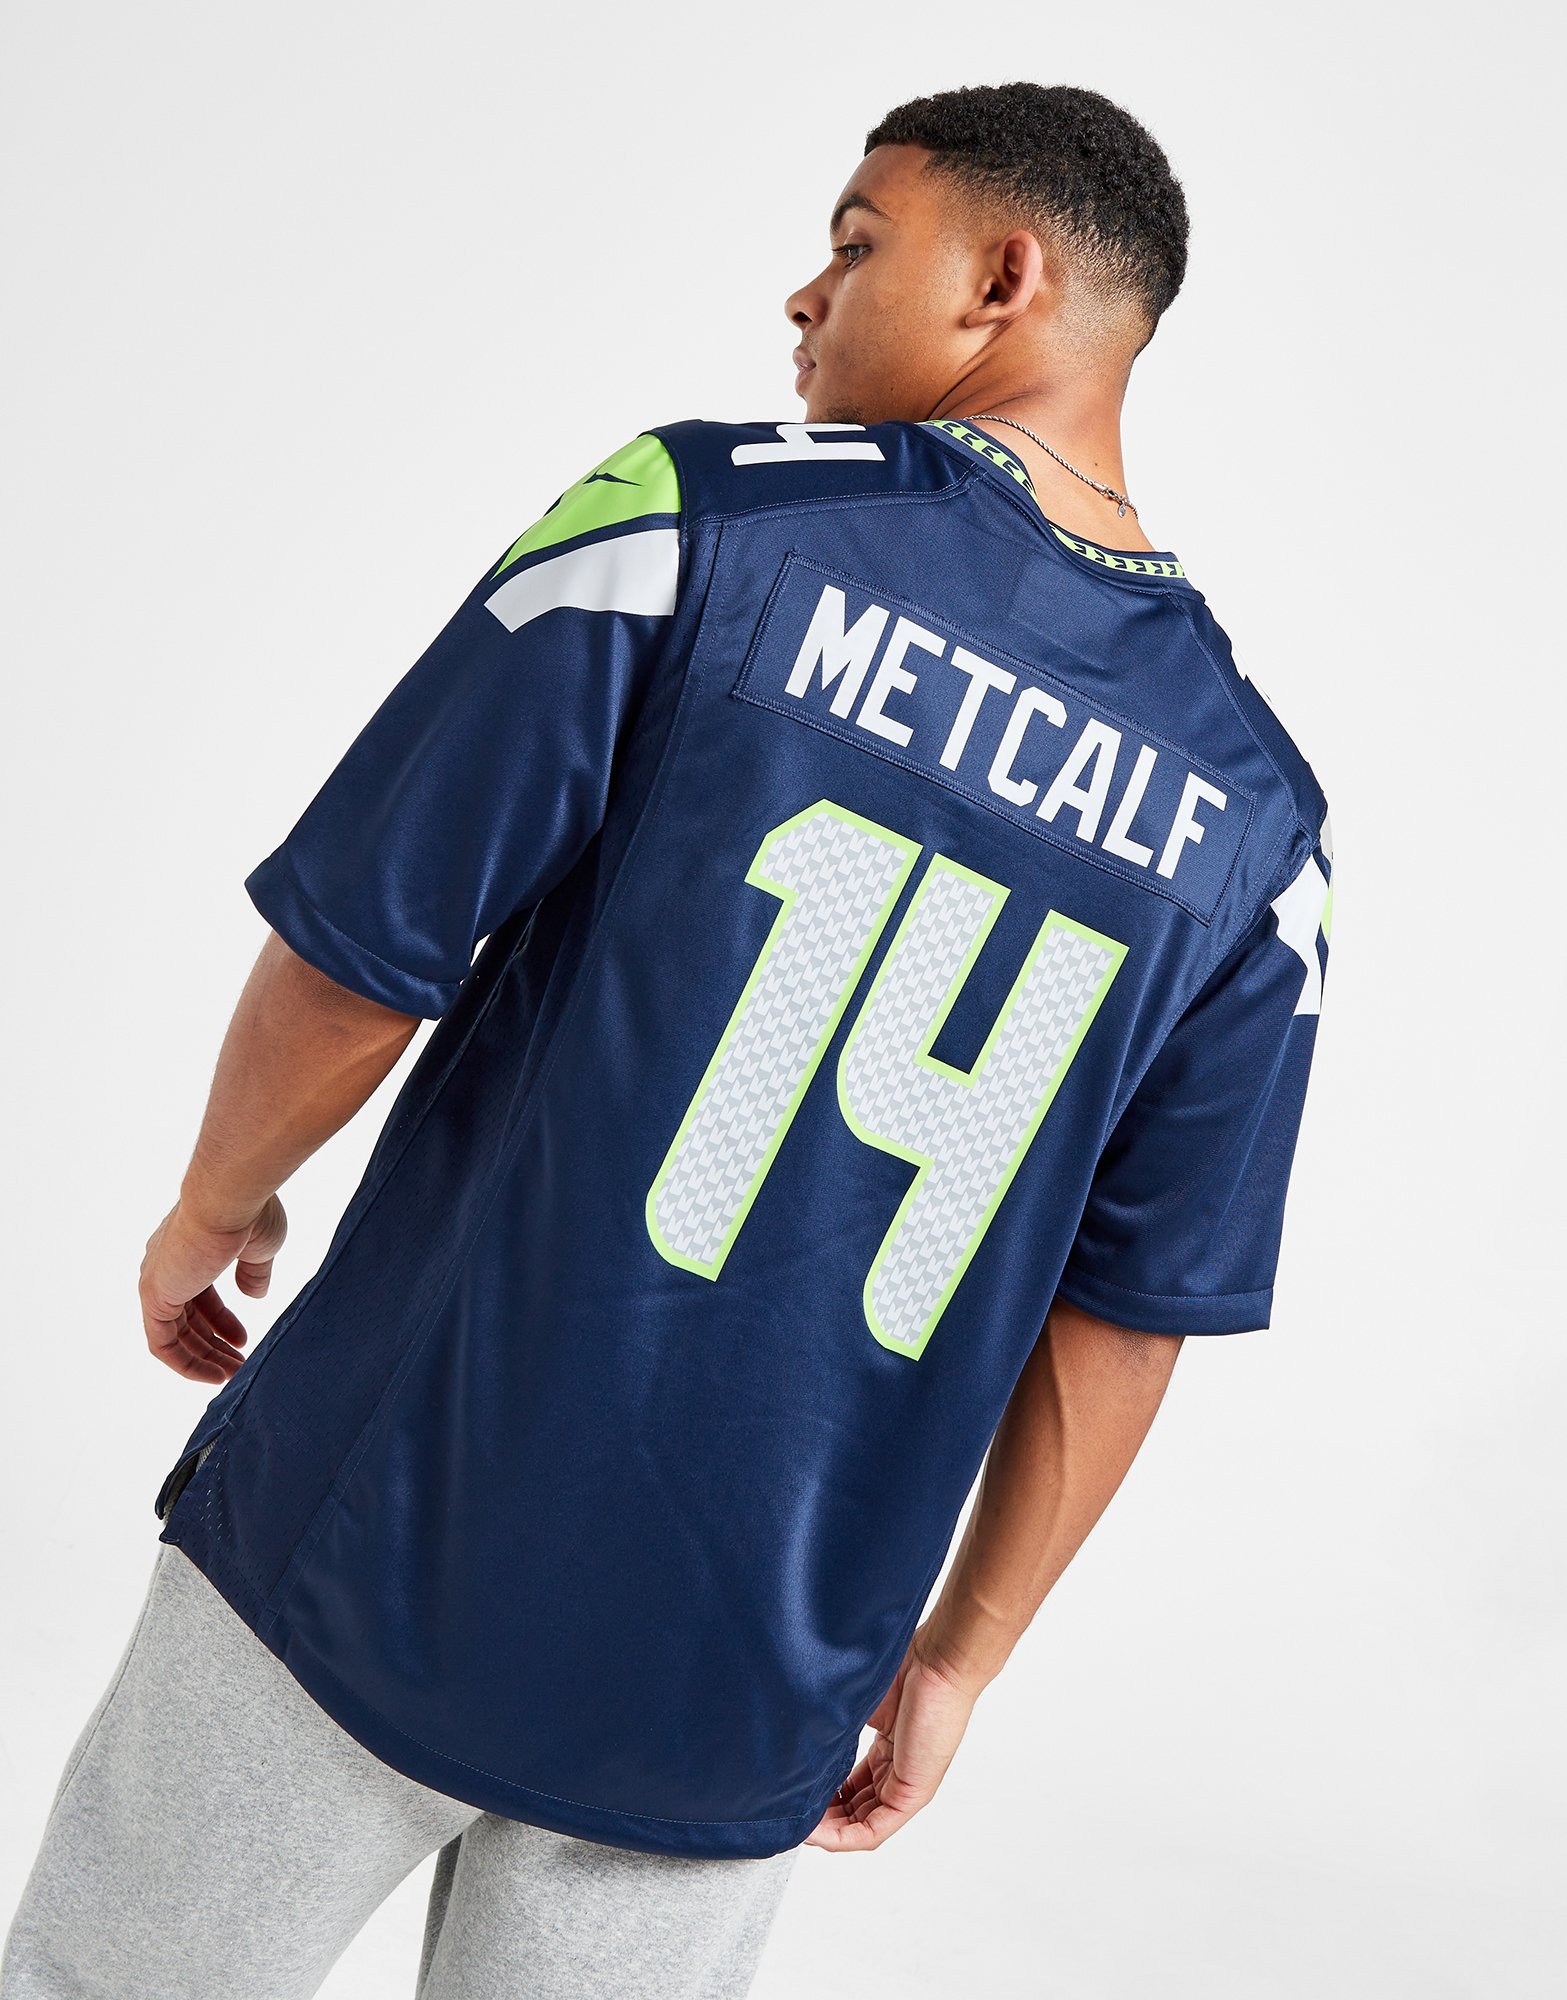 Is my jersey too big? : r/Seahawks